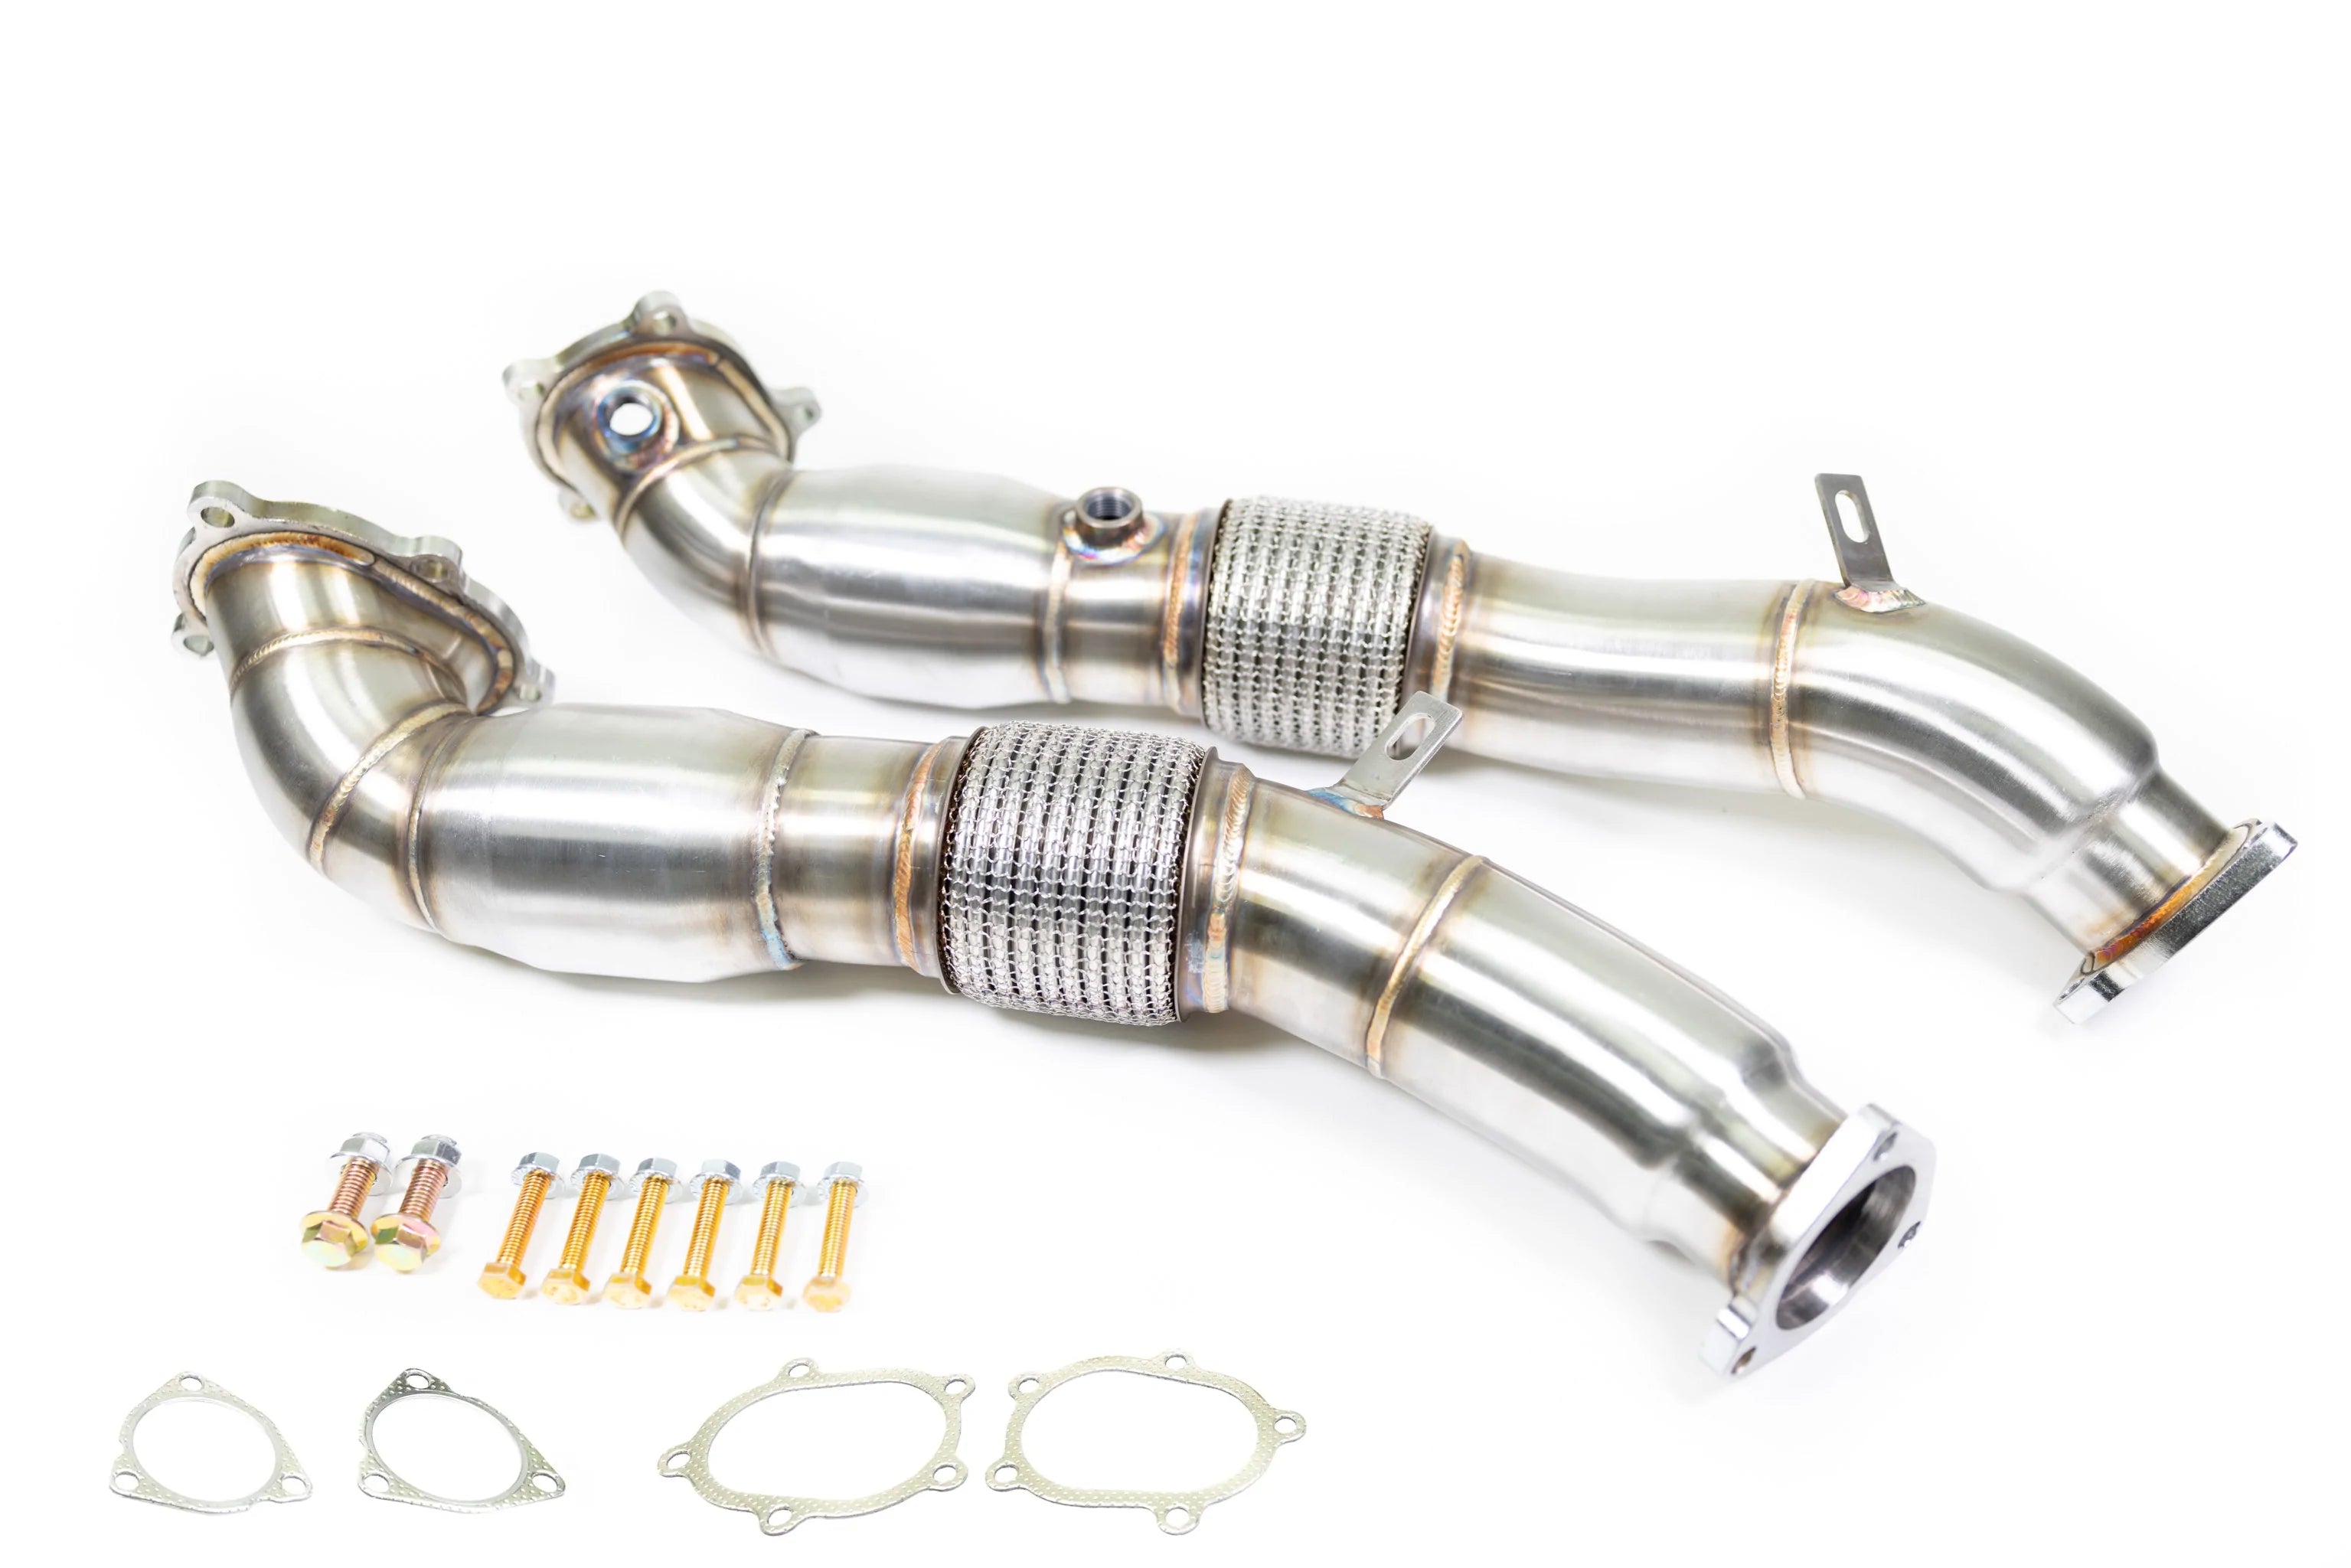 ARM Downpipes - Audi C7/C7.5 S6/S7/RS7 and D4 S8 4.0T